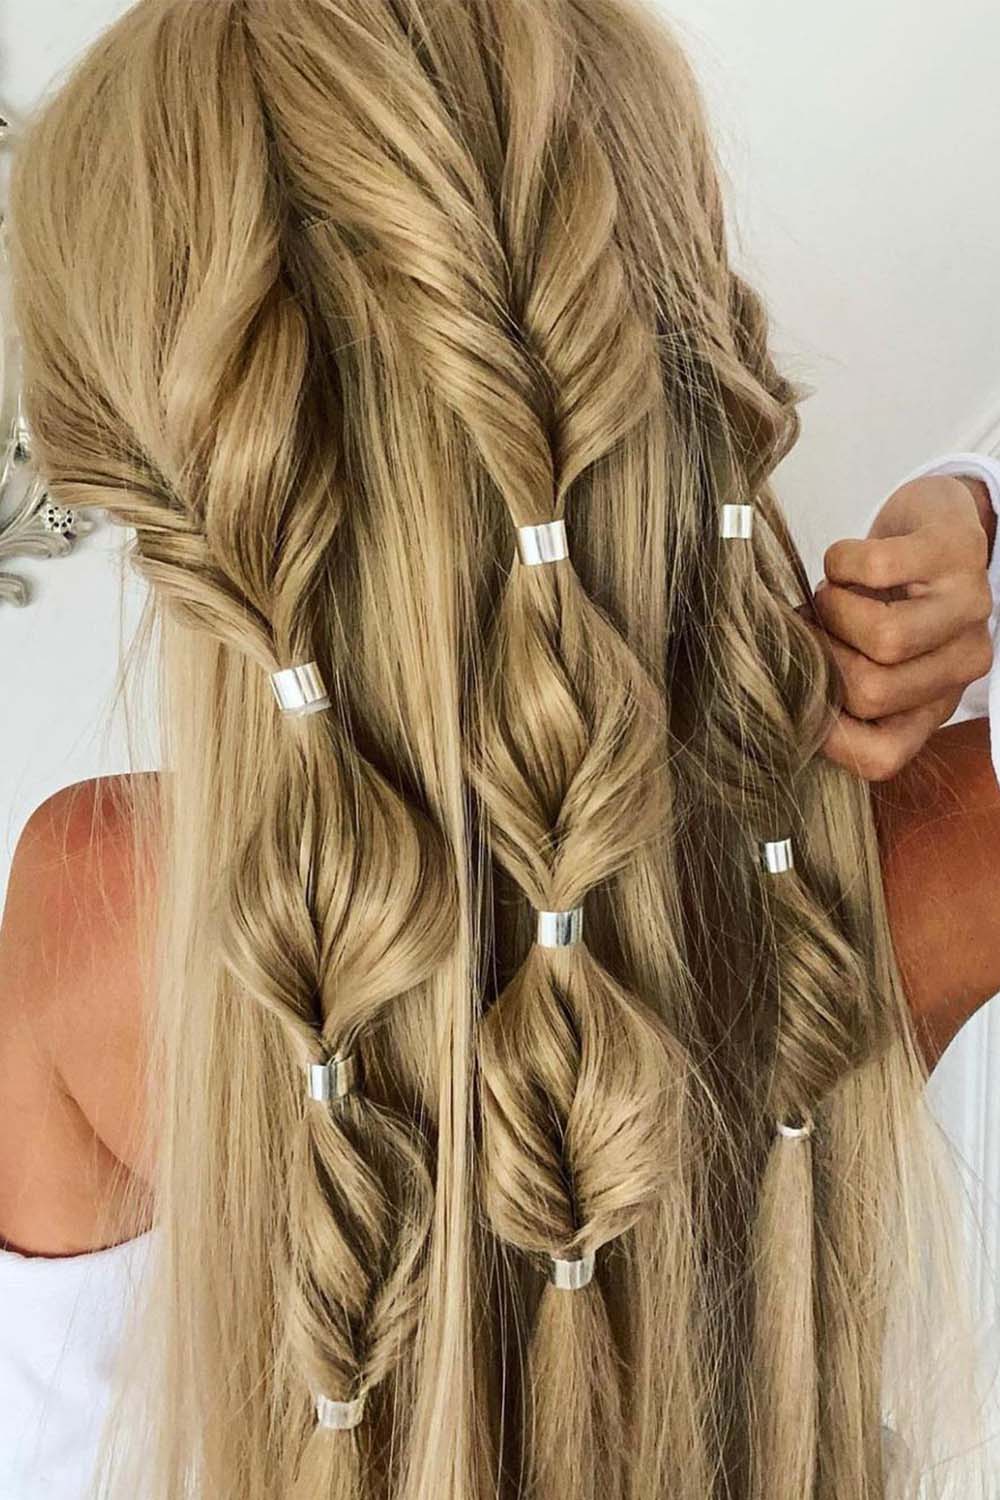 Everyday Hairstyles: 20 Easy and Cute Hairstyles for Home